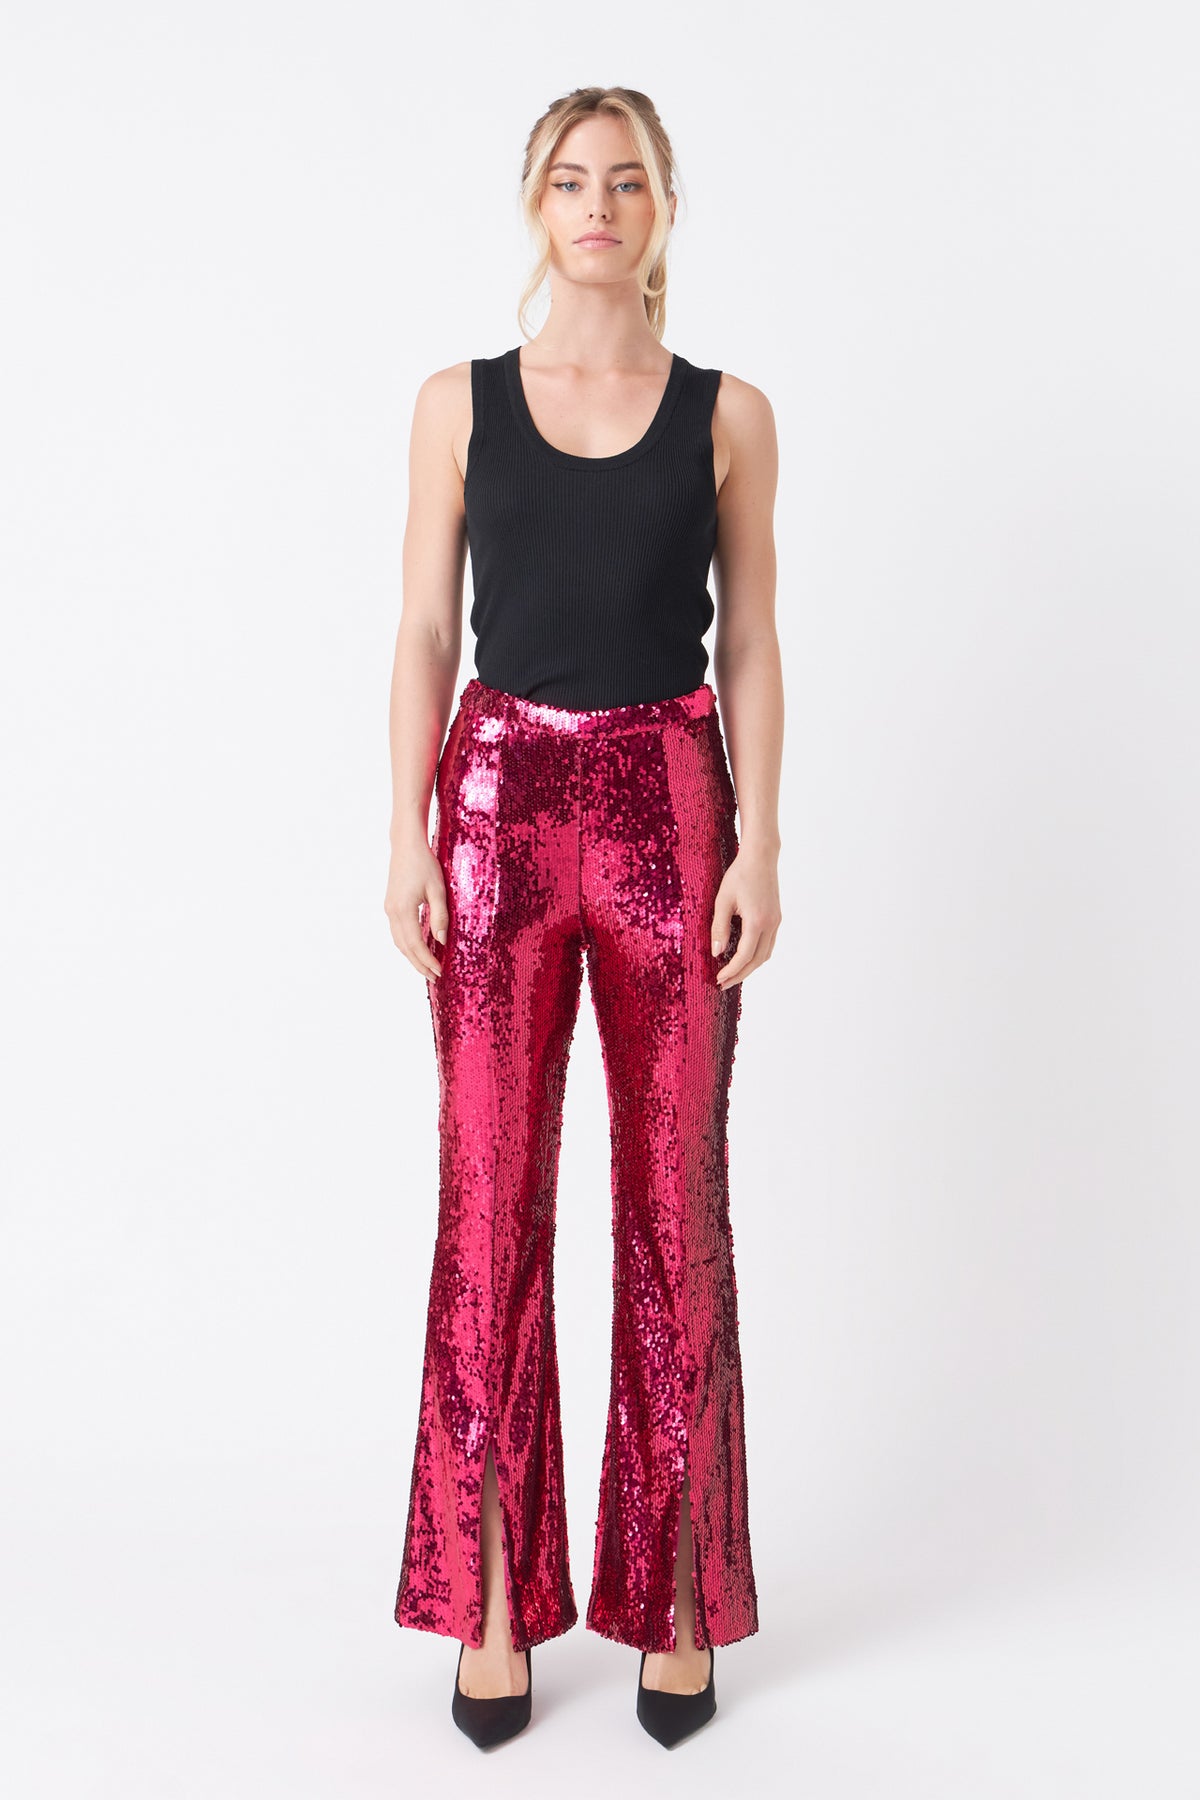 ENDLESS ROSE - Sequin Flare Pants - PANTS available at Objectrare